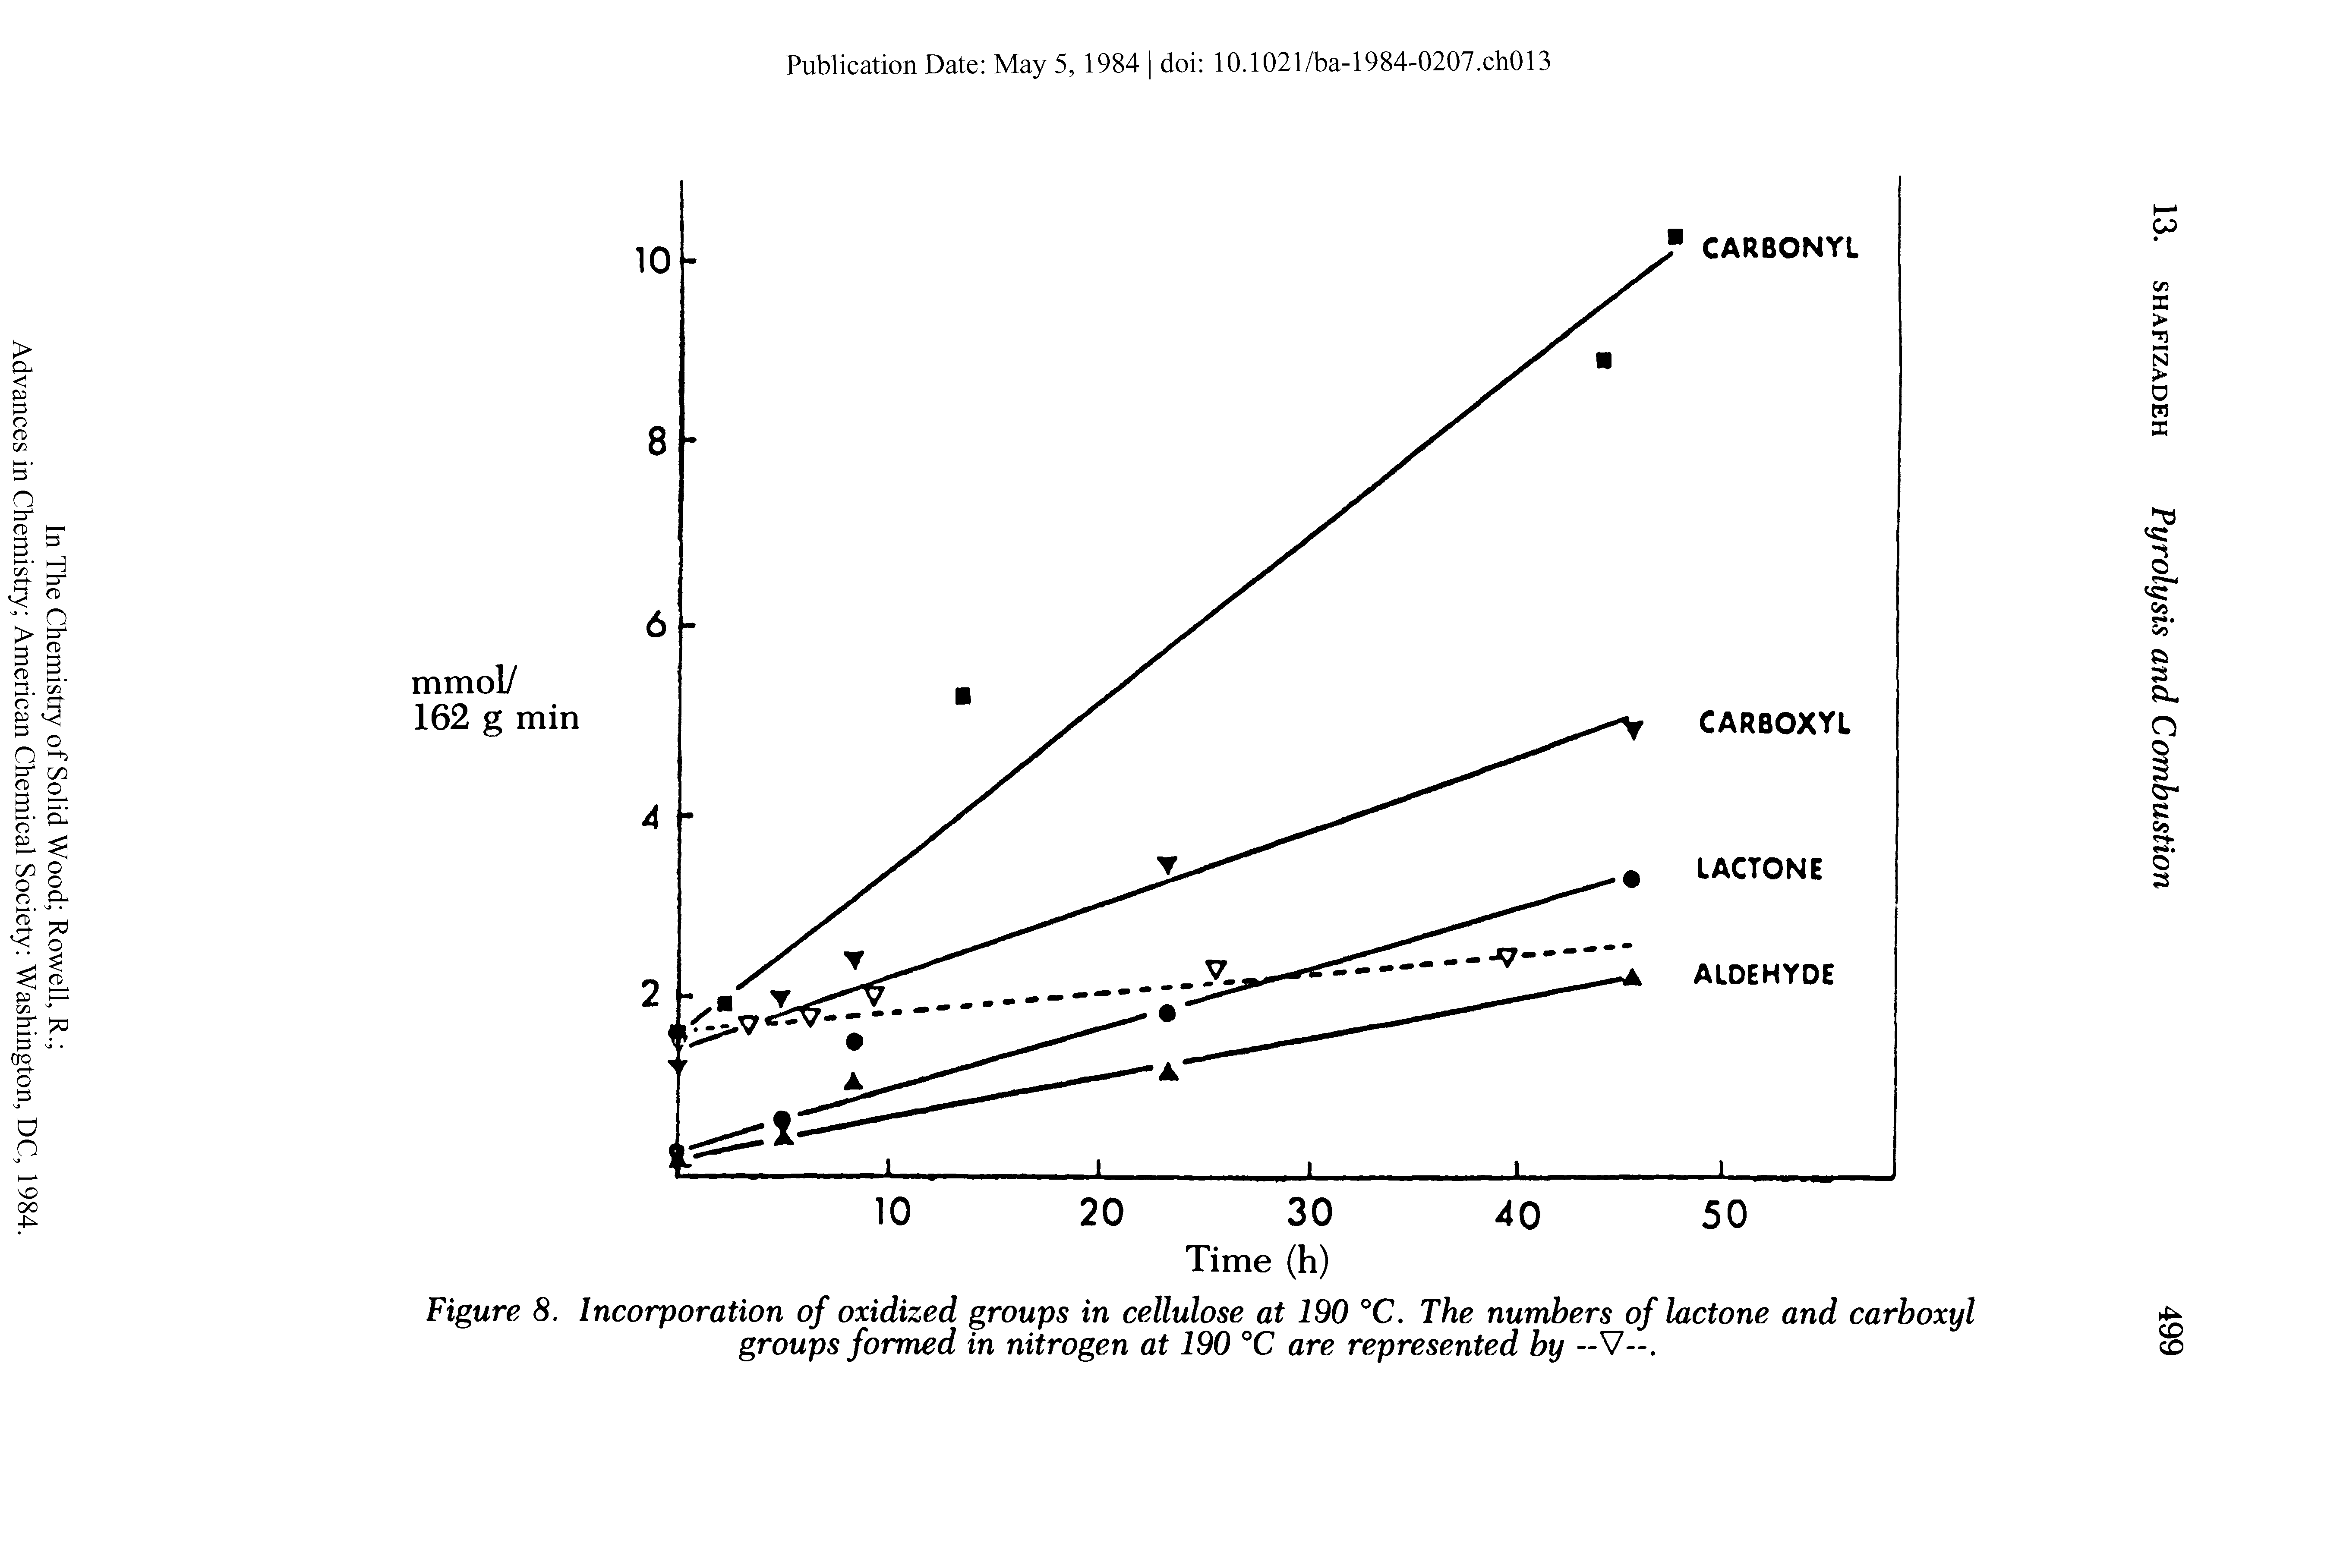 Figure 8. Incorporation of oxidized groups in cellulose at 190 °C. The numbers of lactone and carboxyl groups formed in nitrogen at 190 °C are represented by -V-.